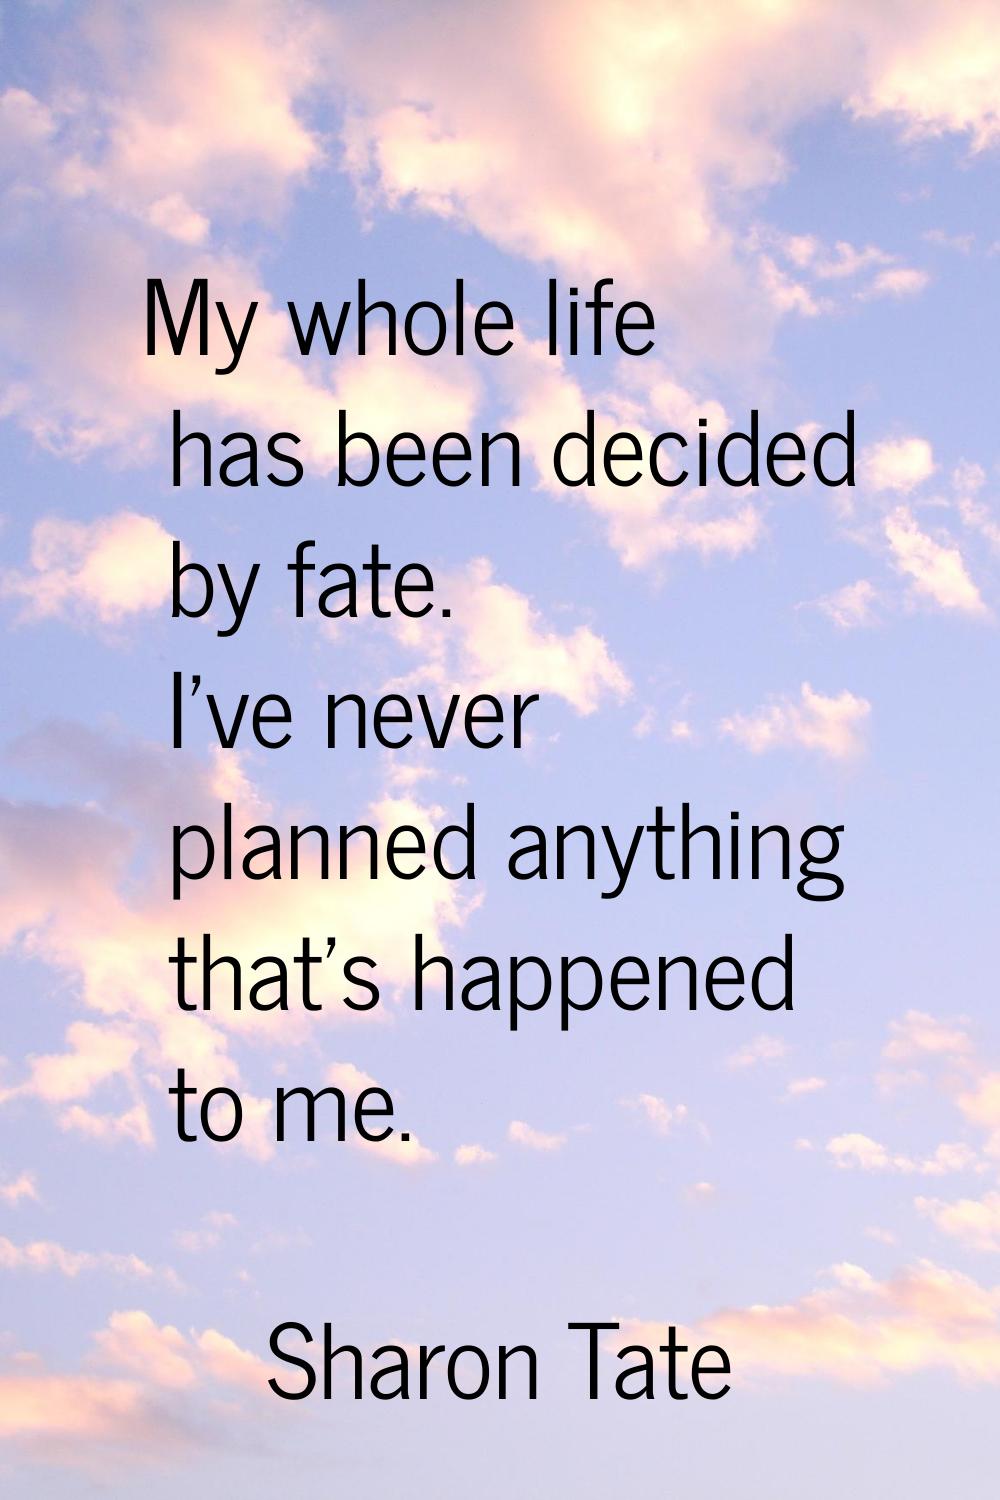 My whole life has been decided by fate. I've never planned anything that's happened to me.